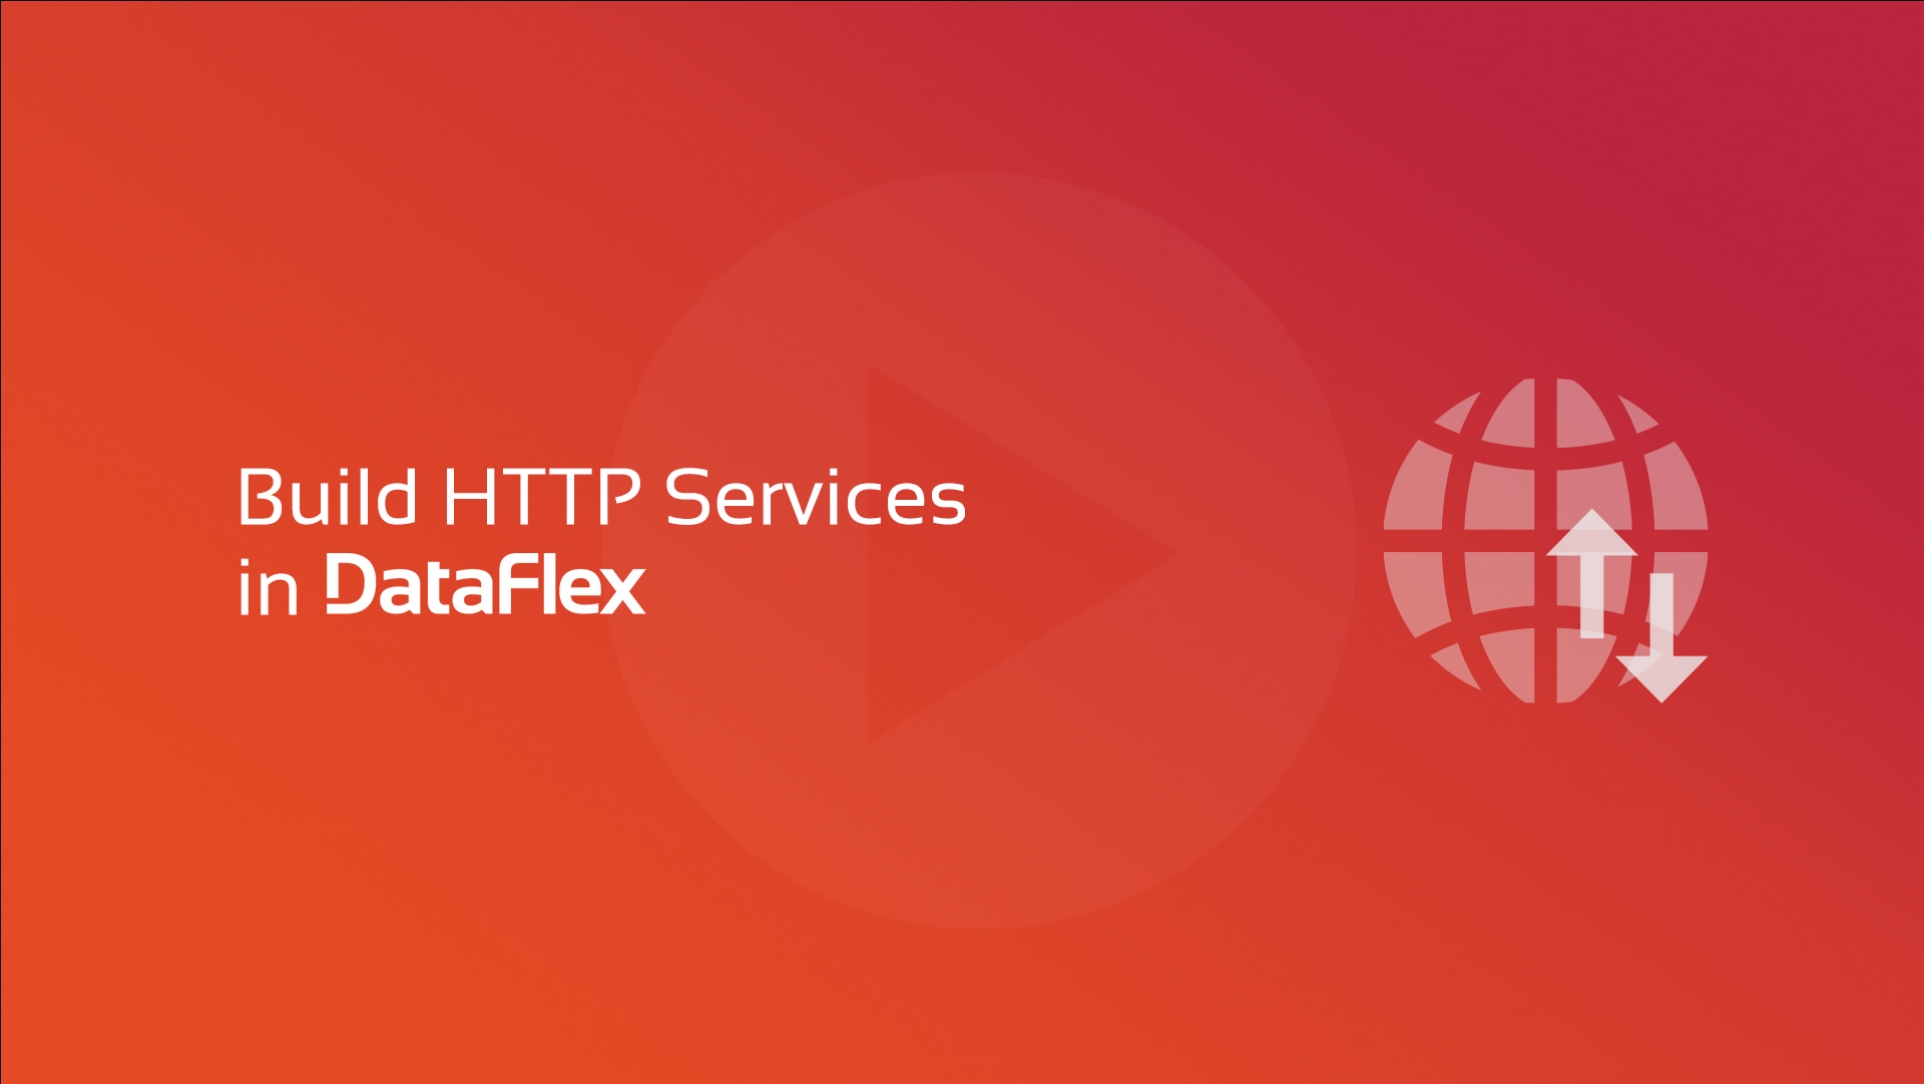 New video course: Build HTTP Services in DataFlex